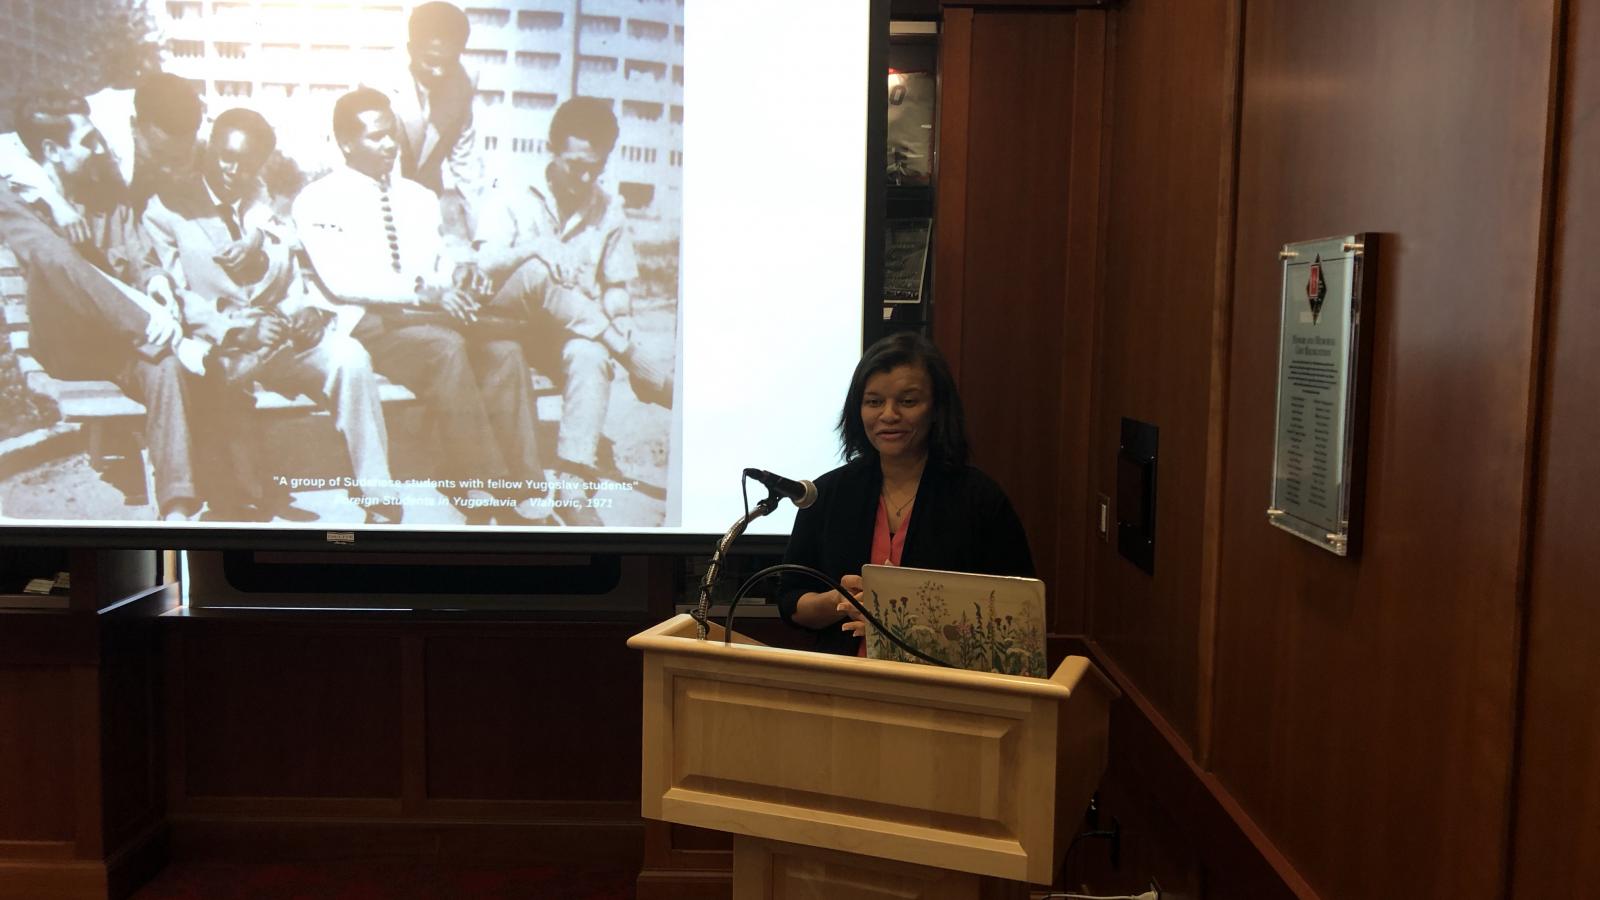 Dr. Sunnie Rucker-Chang Presents the Inaugural Kalbouss Lecture